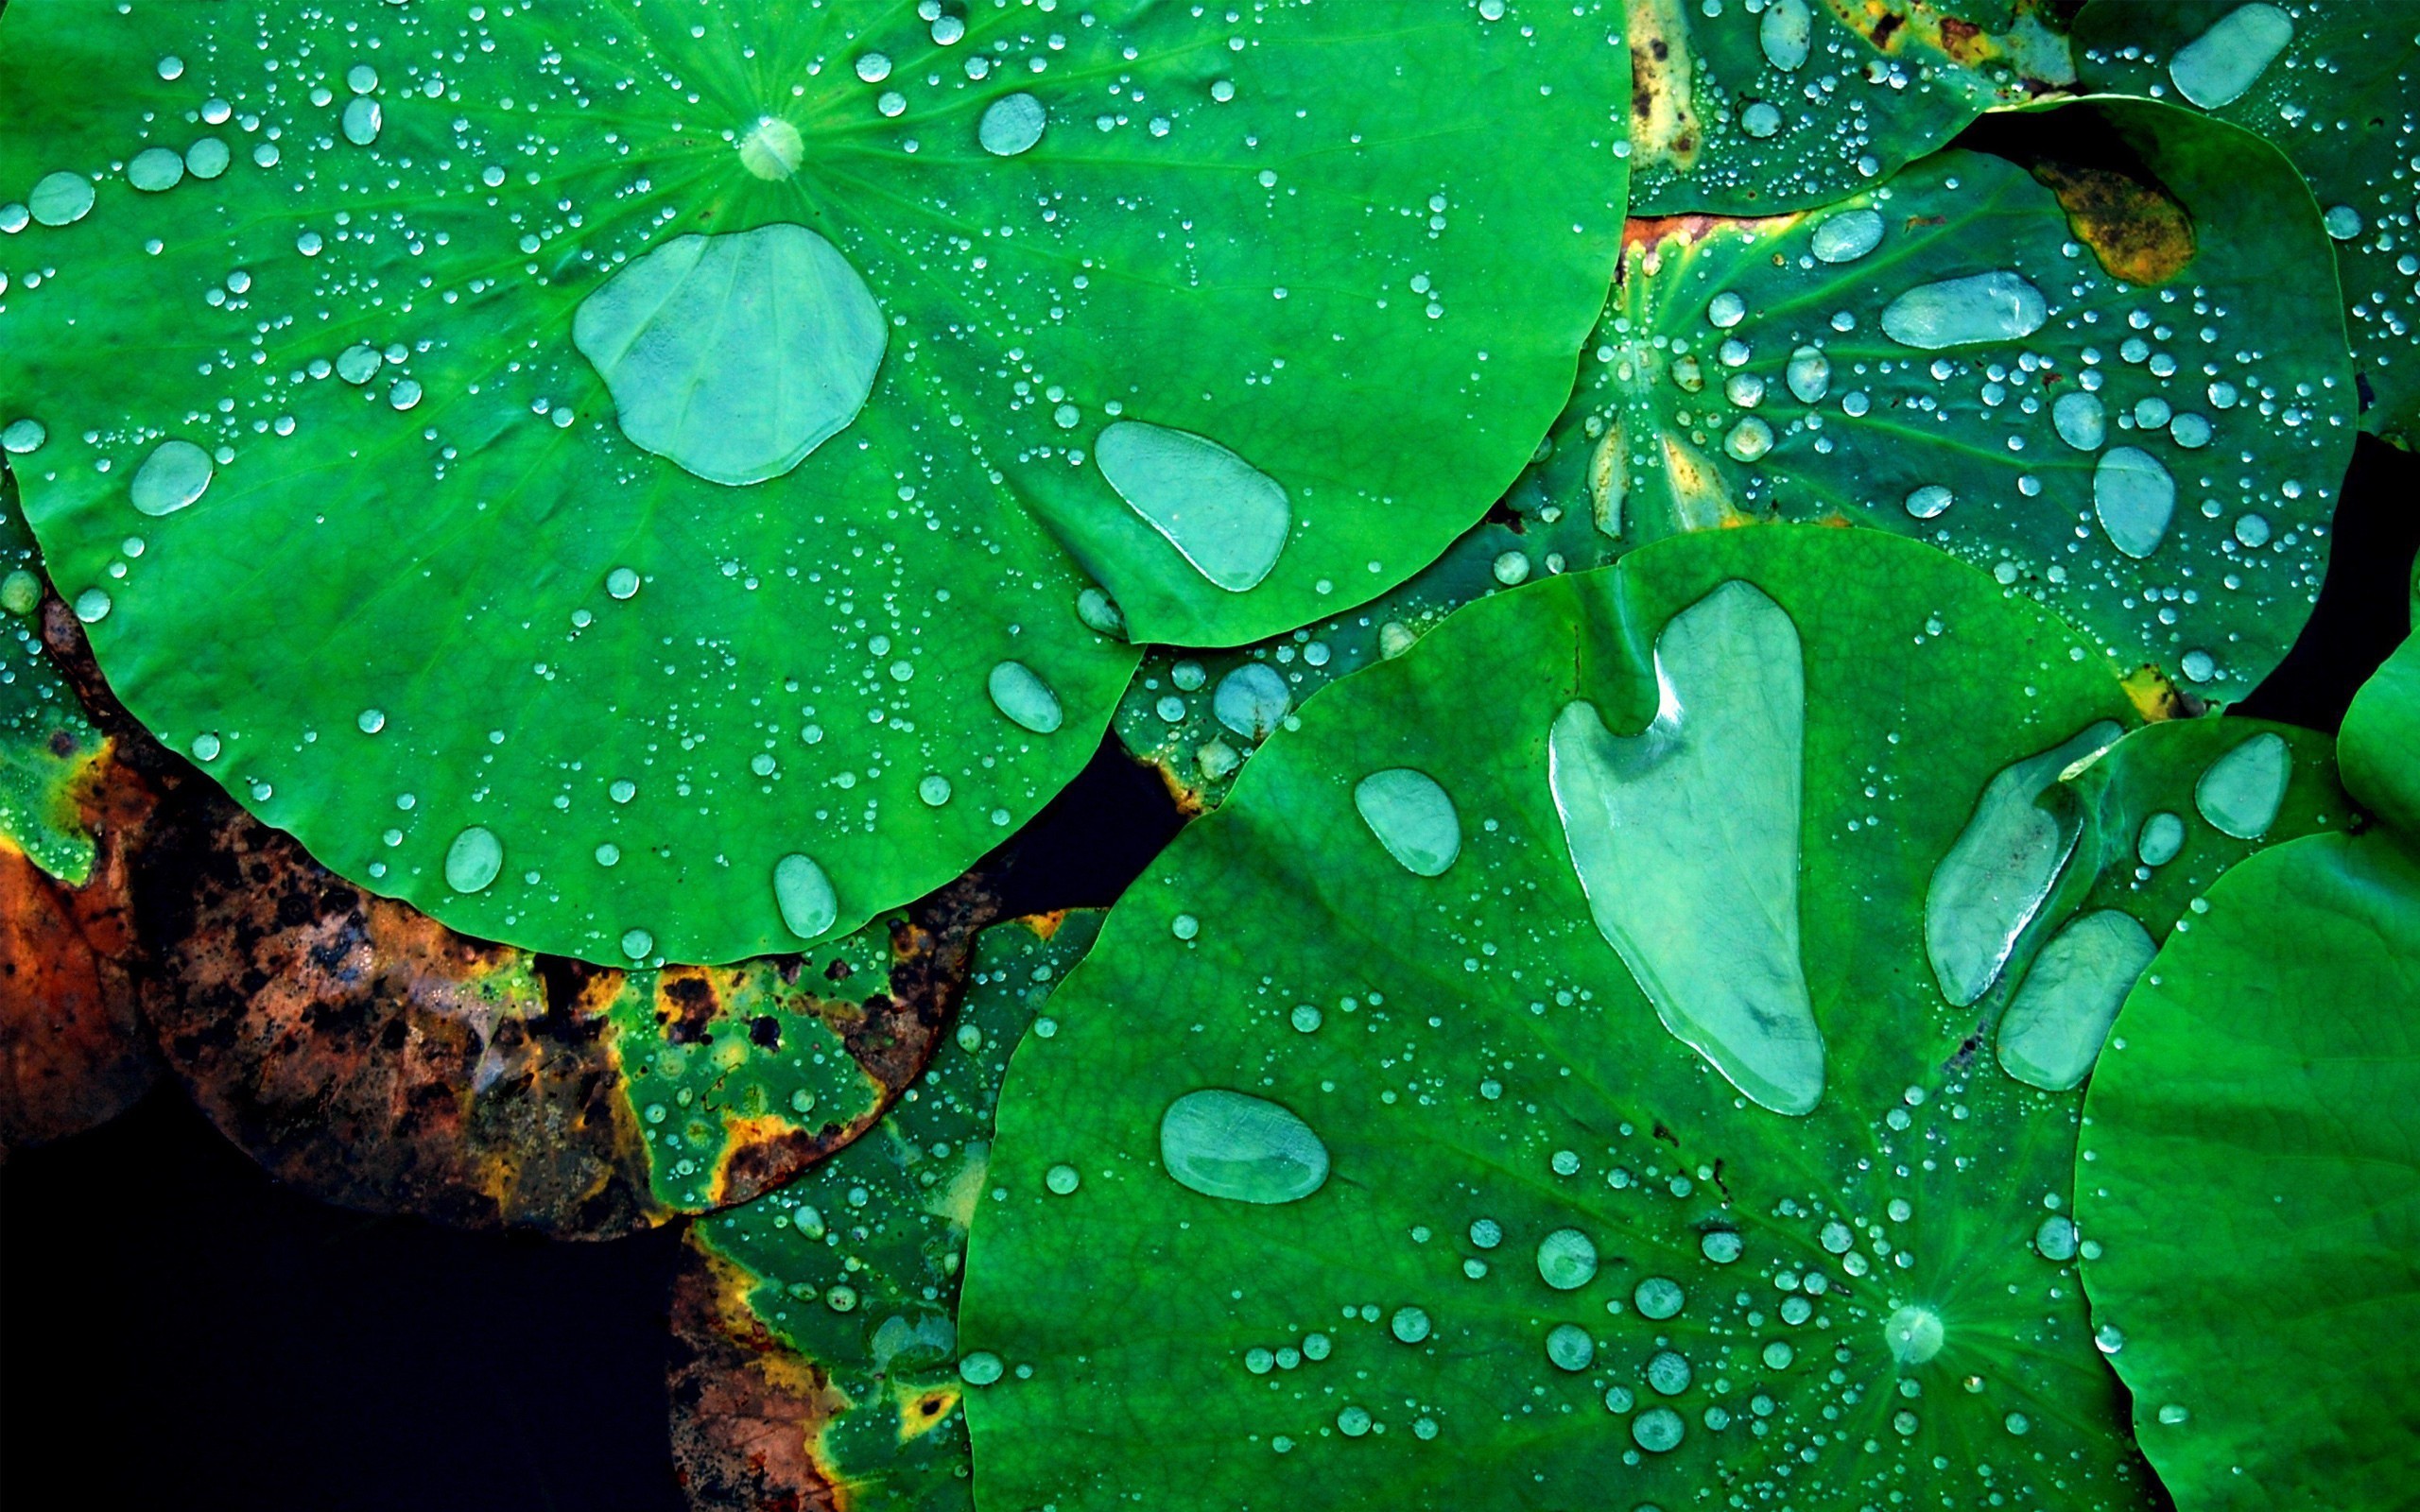 Image: Drops, Lotus, green, leaves, plant, water